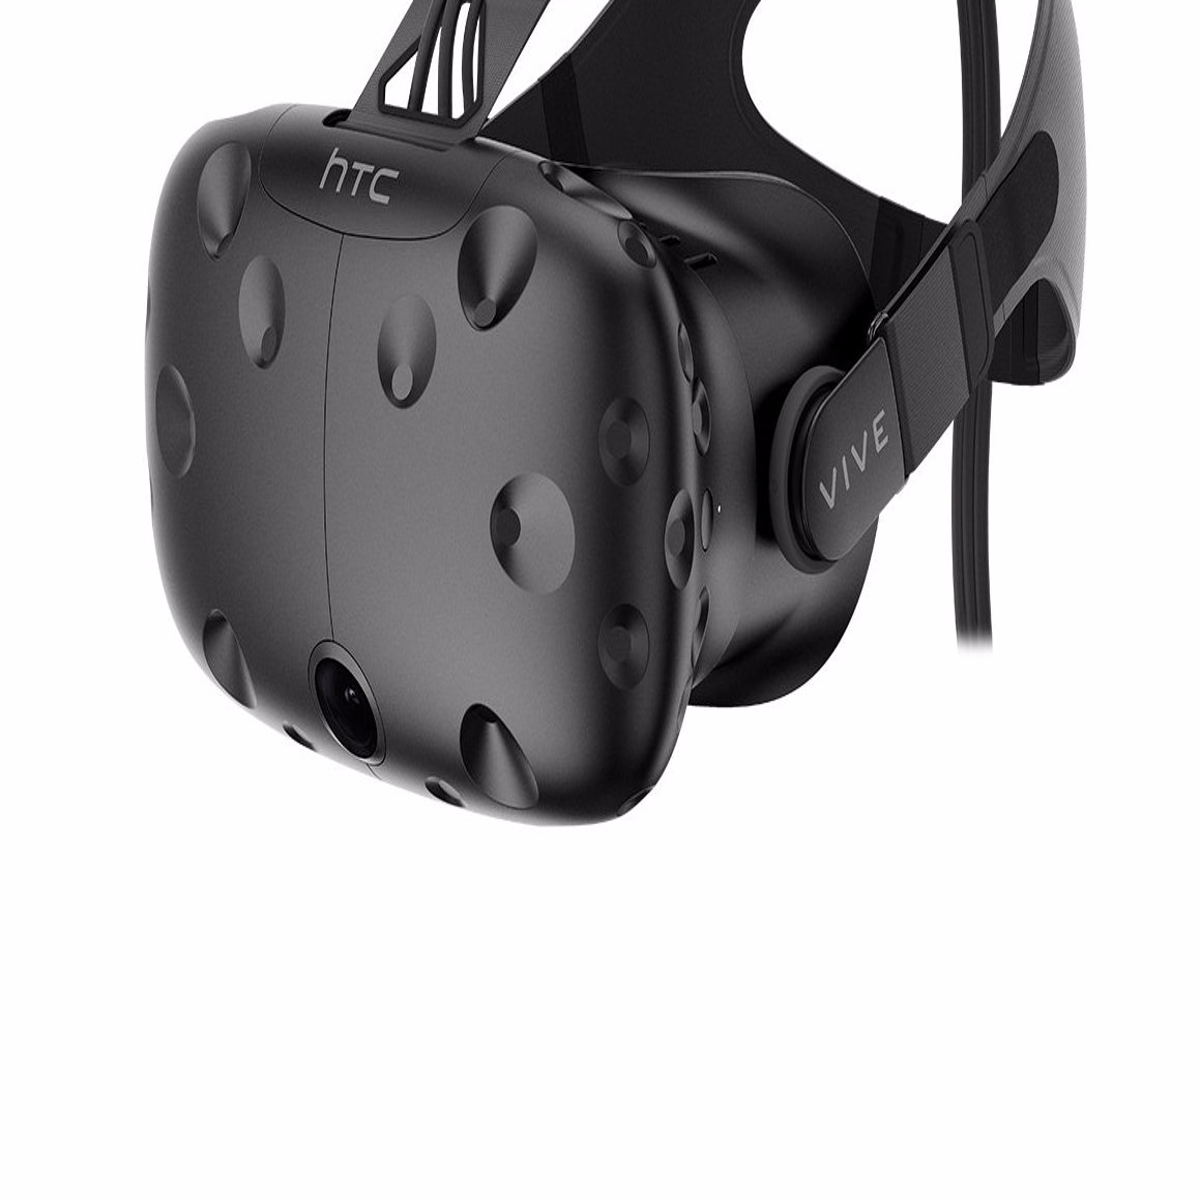 https://assetsio.reedpopcdn.com/digitalfoundry-2016-htc-vive-review-1460128302608.jpg?width=1200&height=1200&fit=crop&quality=100&format=png&enable=upscale&auto=webp